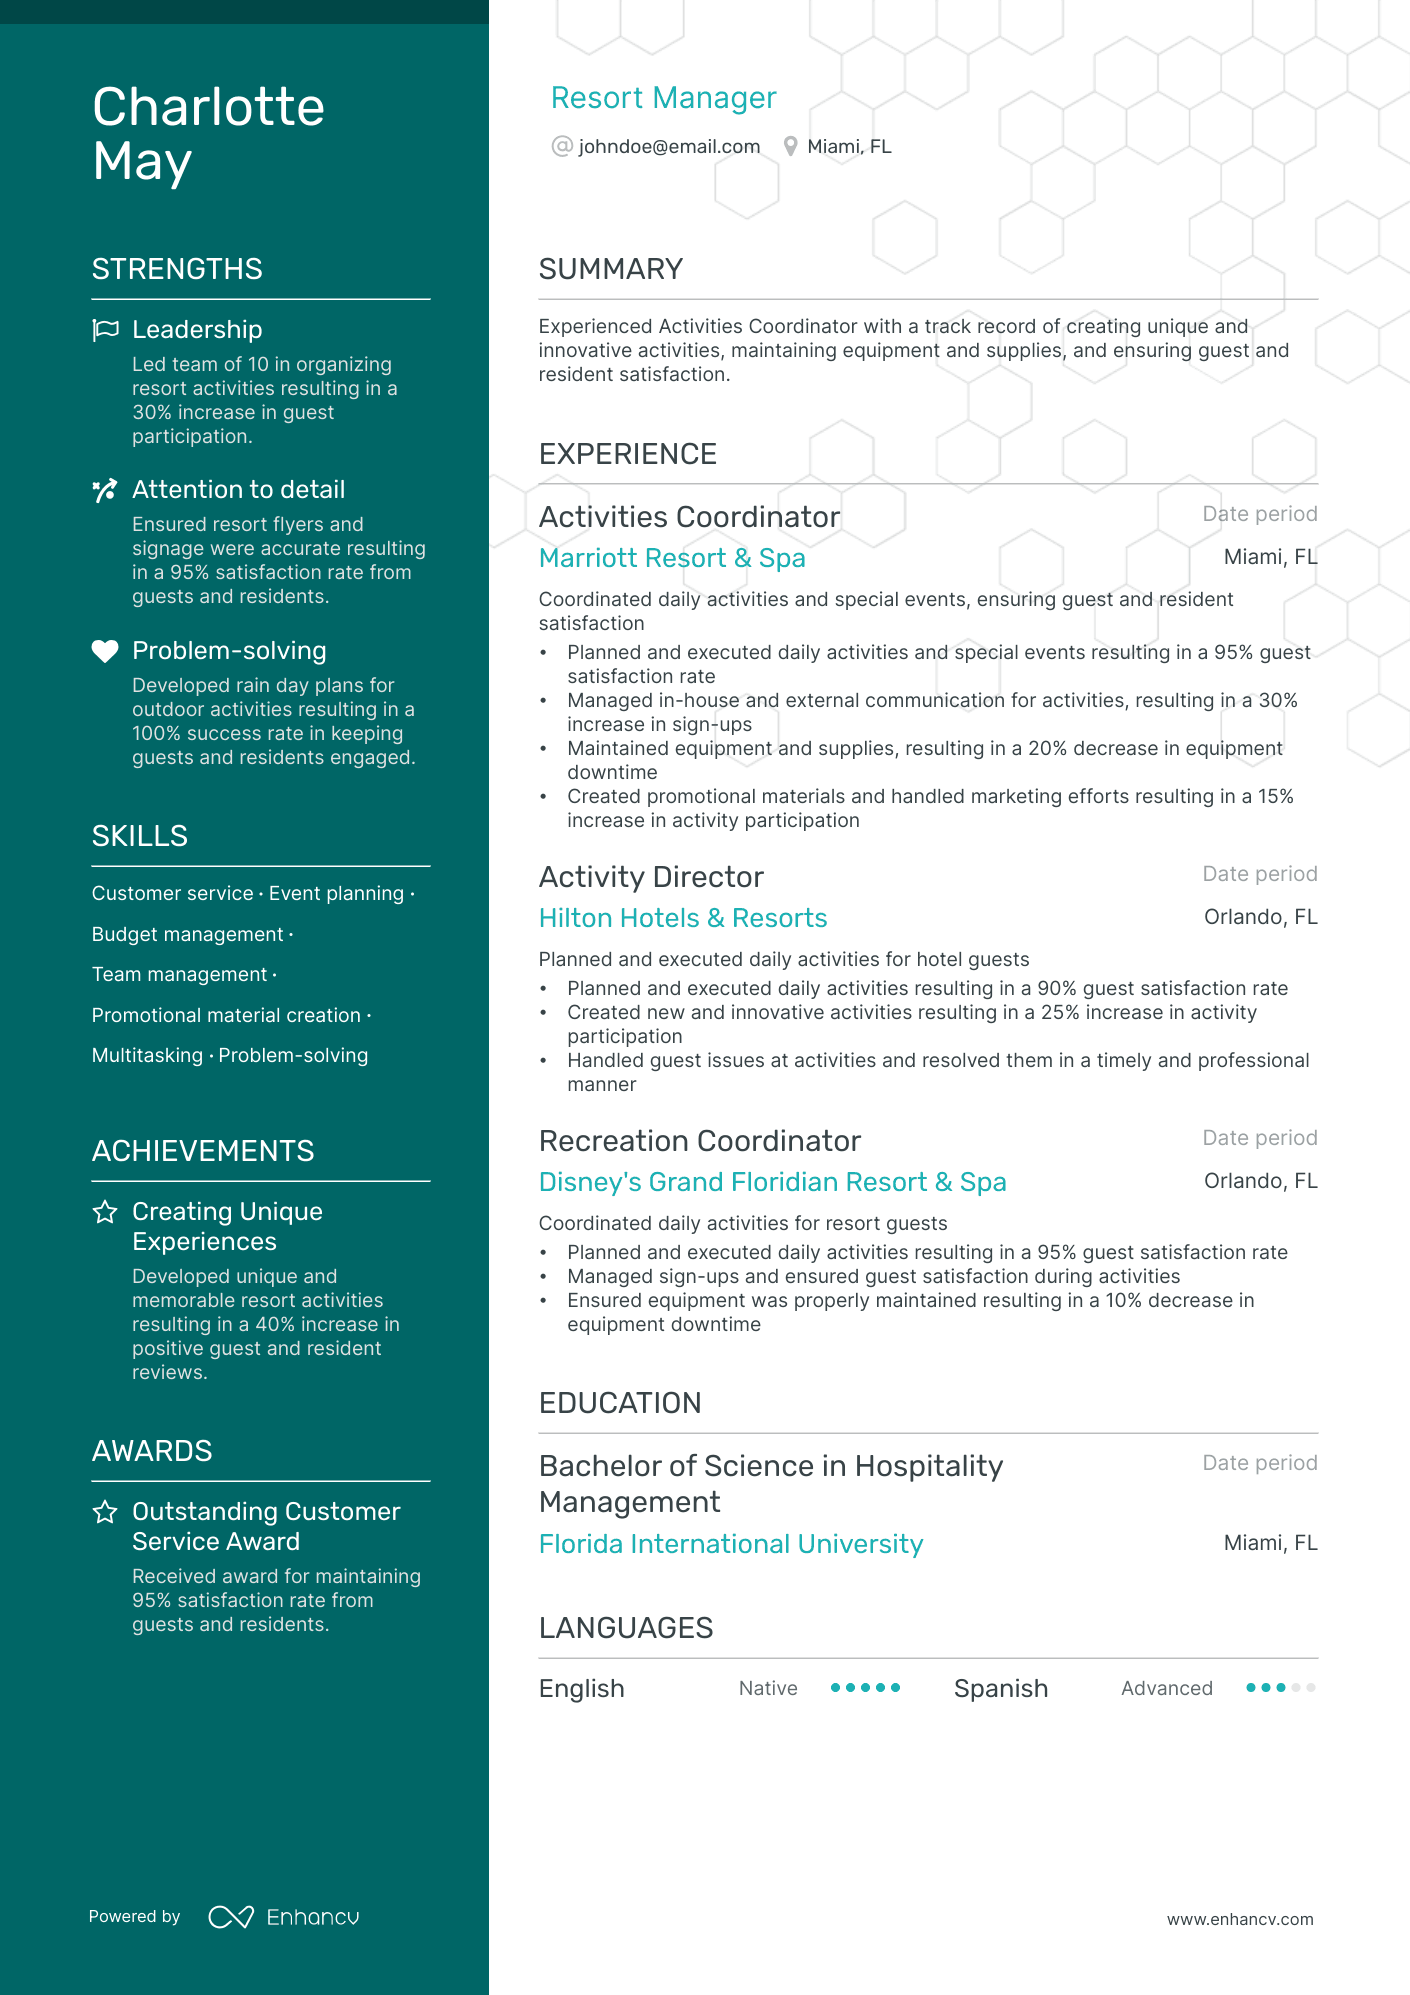 Resort Manager resume example